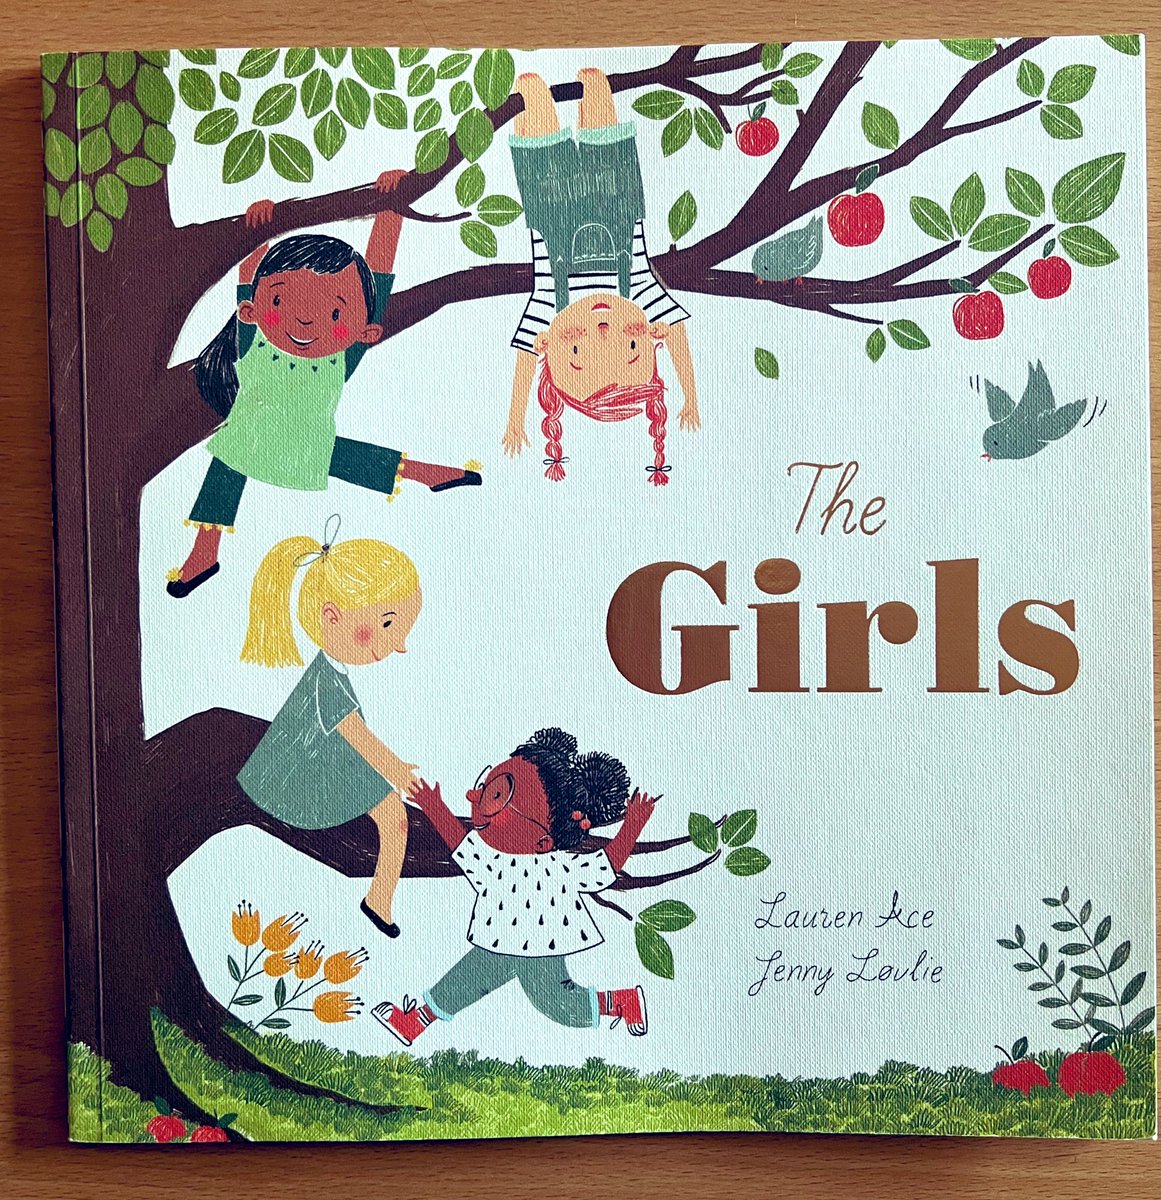 Today in #WonderfulWiesner class, we enjoyed reading the book ‘The Girls’ as part of our #NoOutsiders lesson. We discussed the importance of friendship and created friendship maps to demonstrate the journey of a lifelong friendship☺️❤️ #REACH #WygateWay @WygateA @MrHollyoake